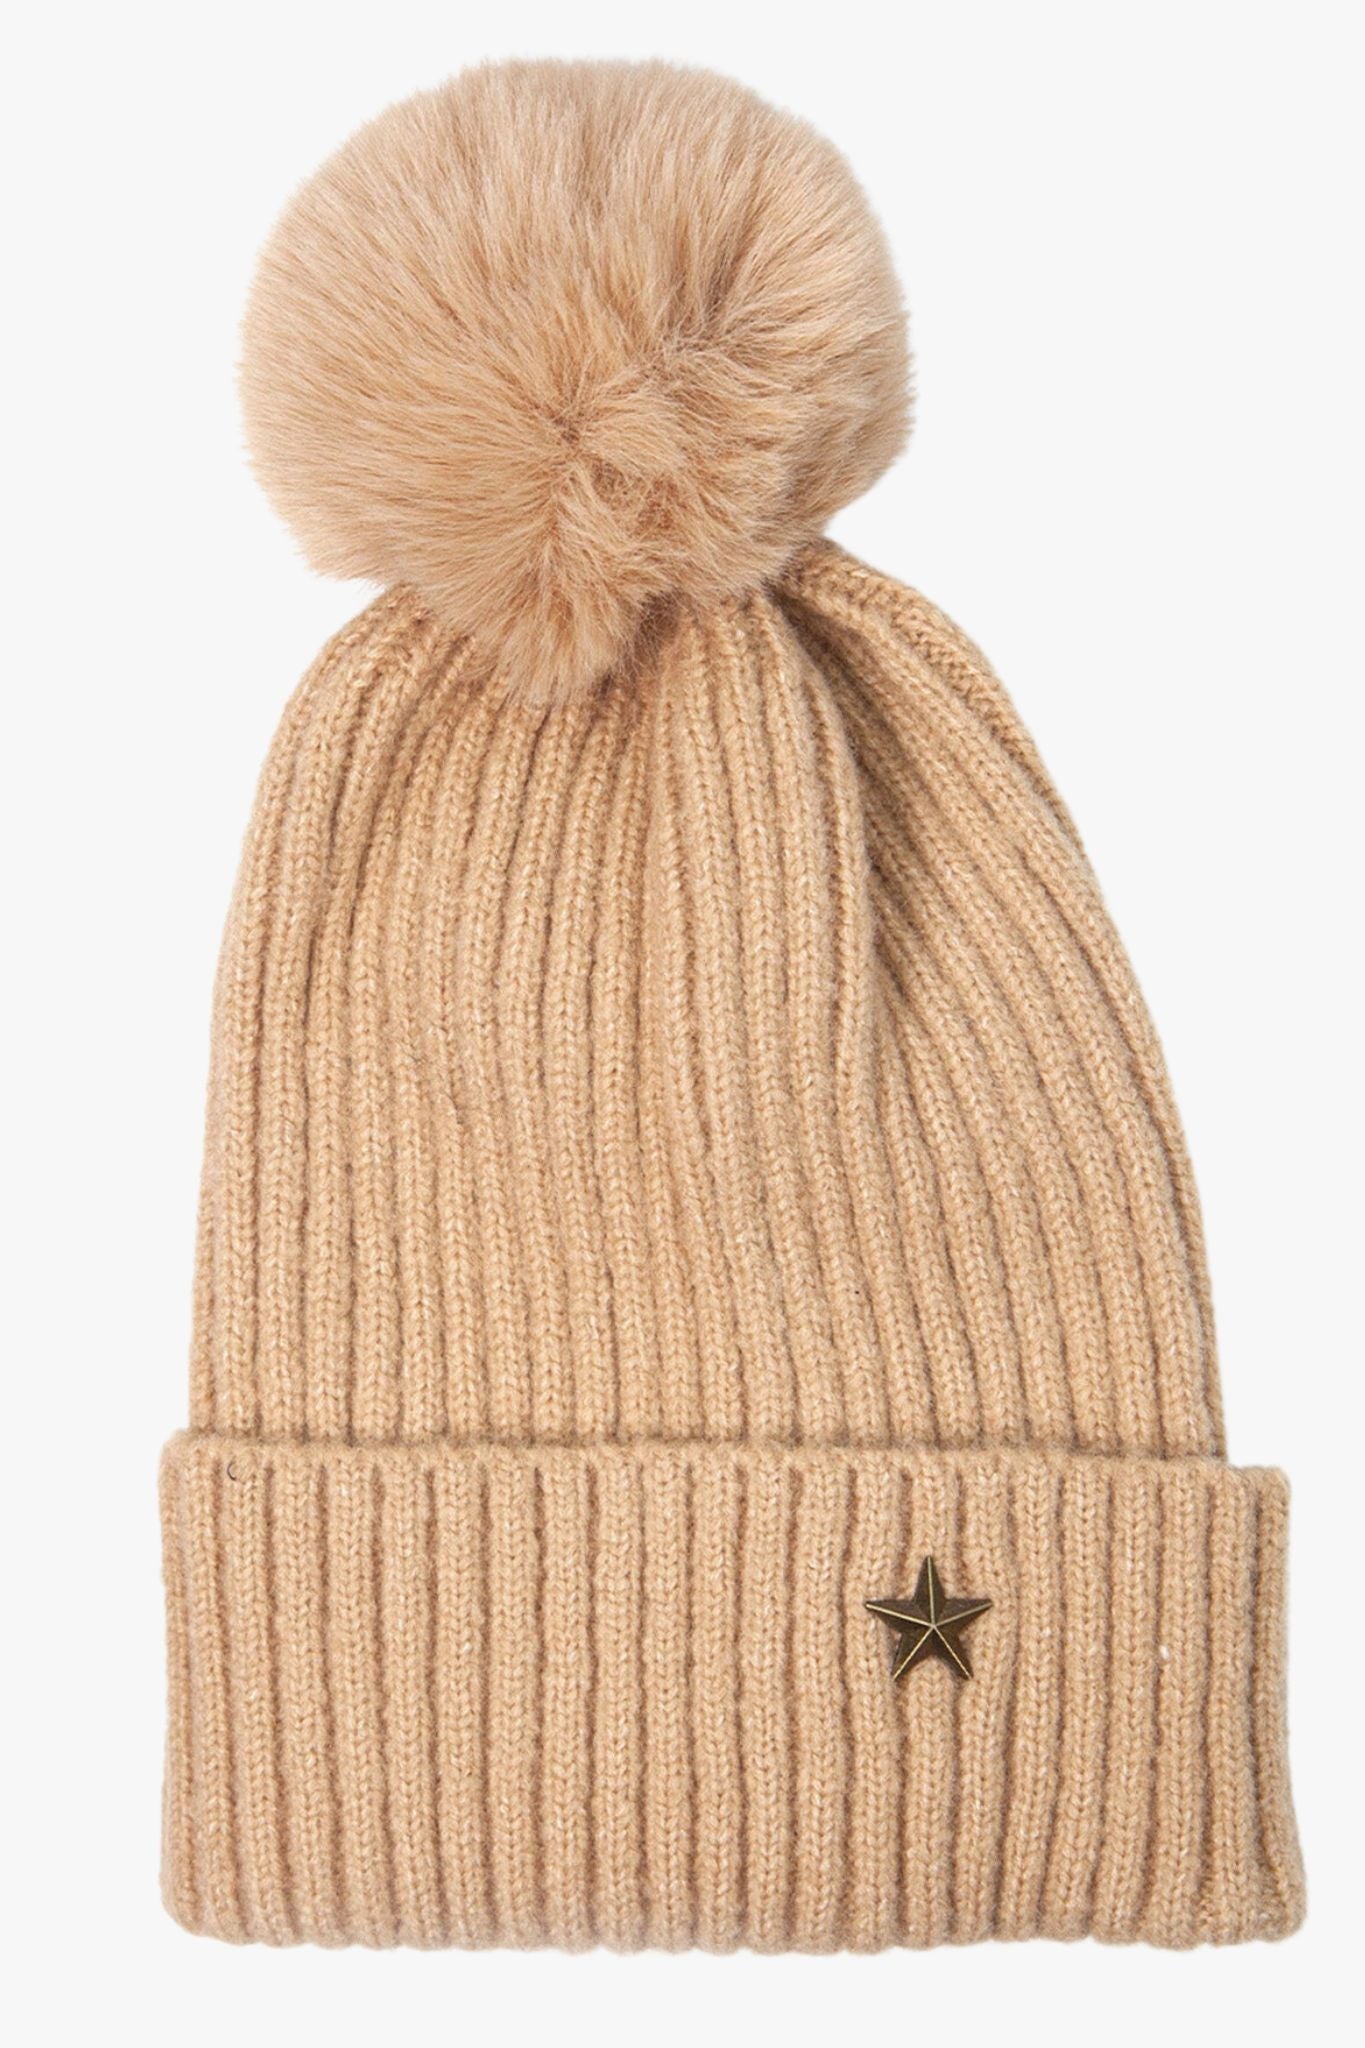 camel beige coloured winter hat with a pom pom and a gold metal star on the rim